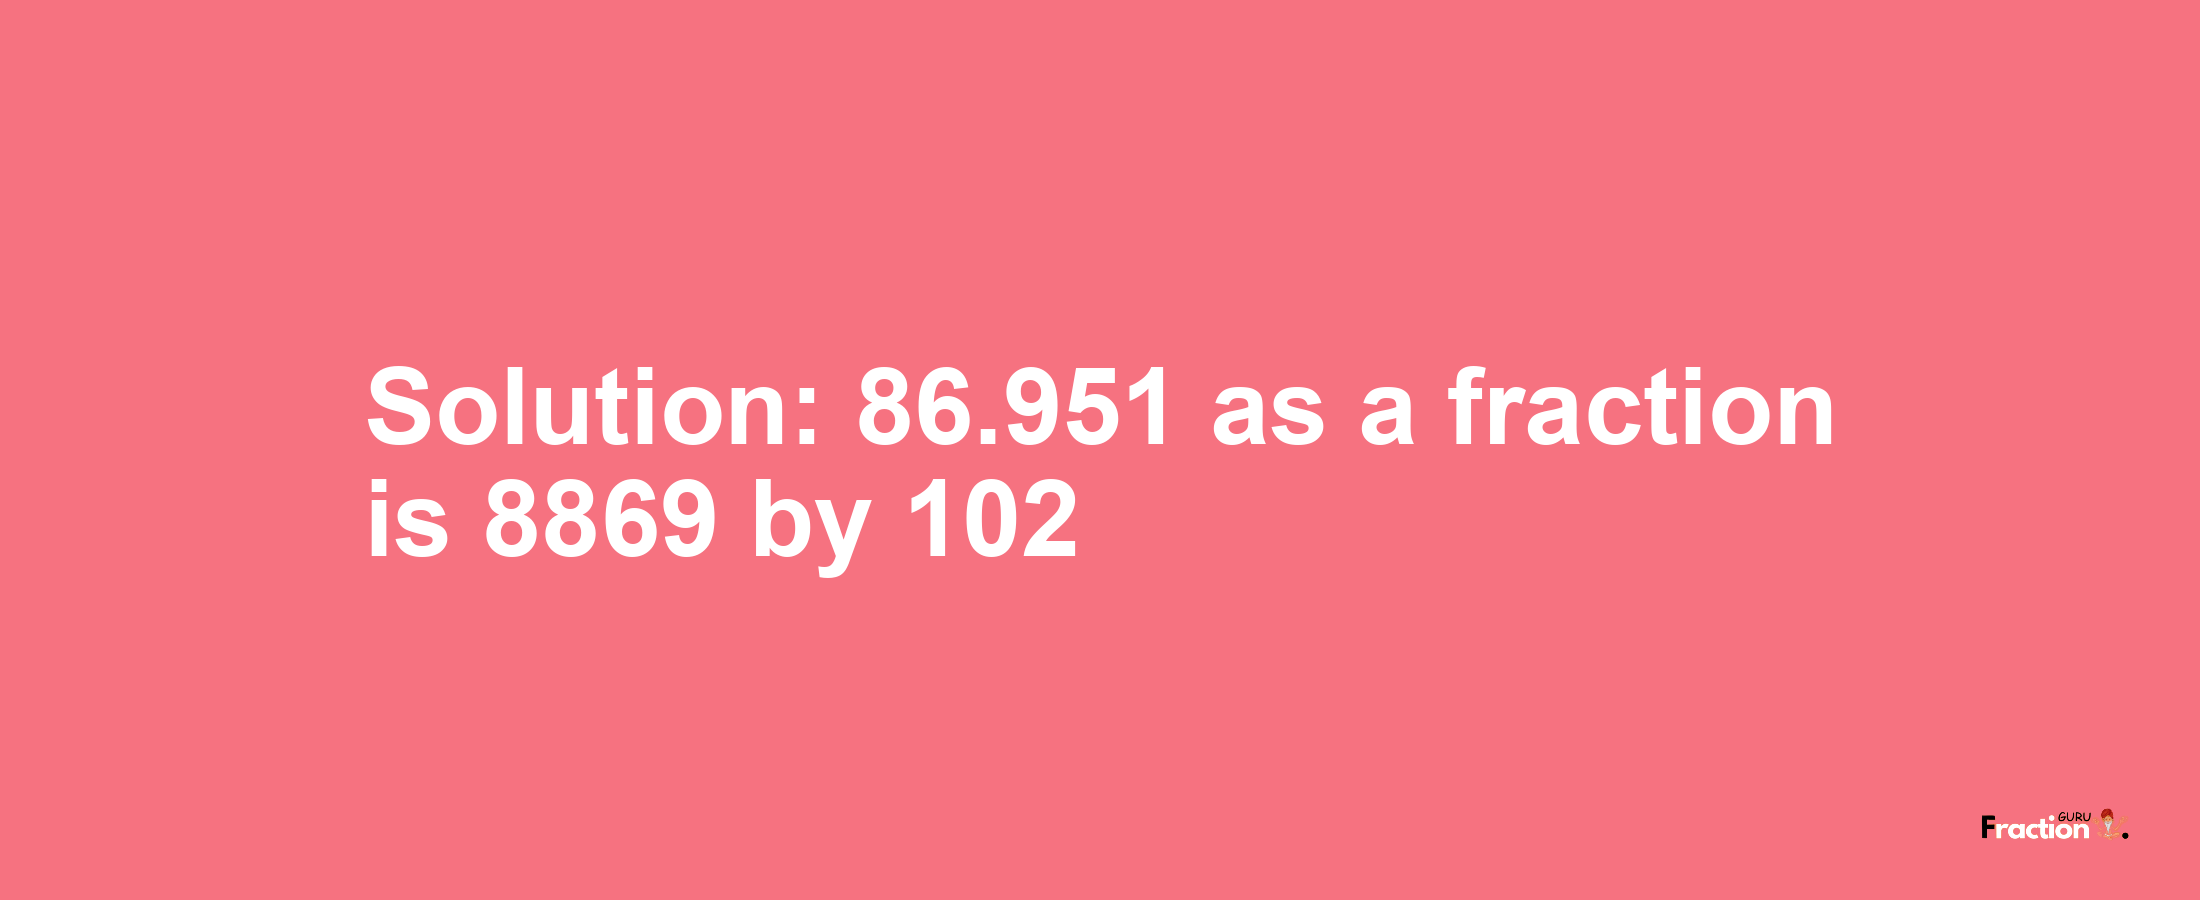 Solution:86.951 as a fraction is 8869/102